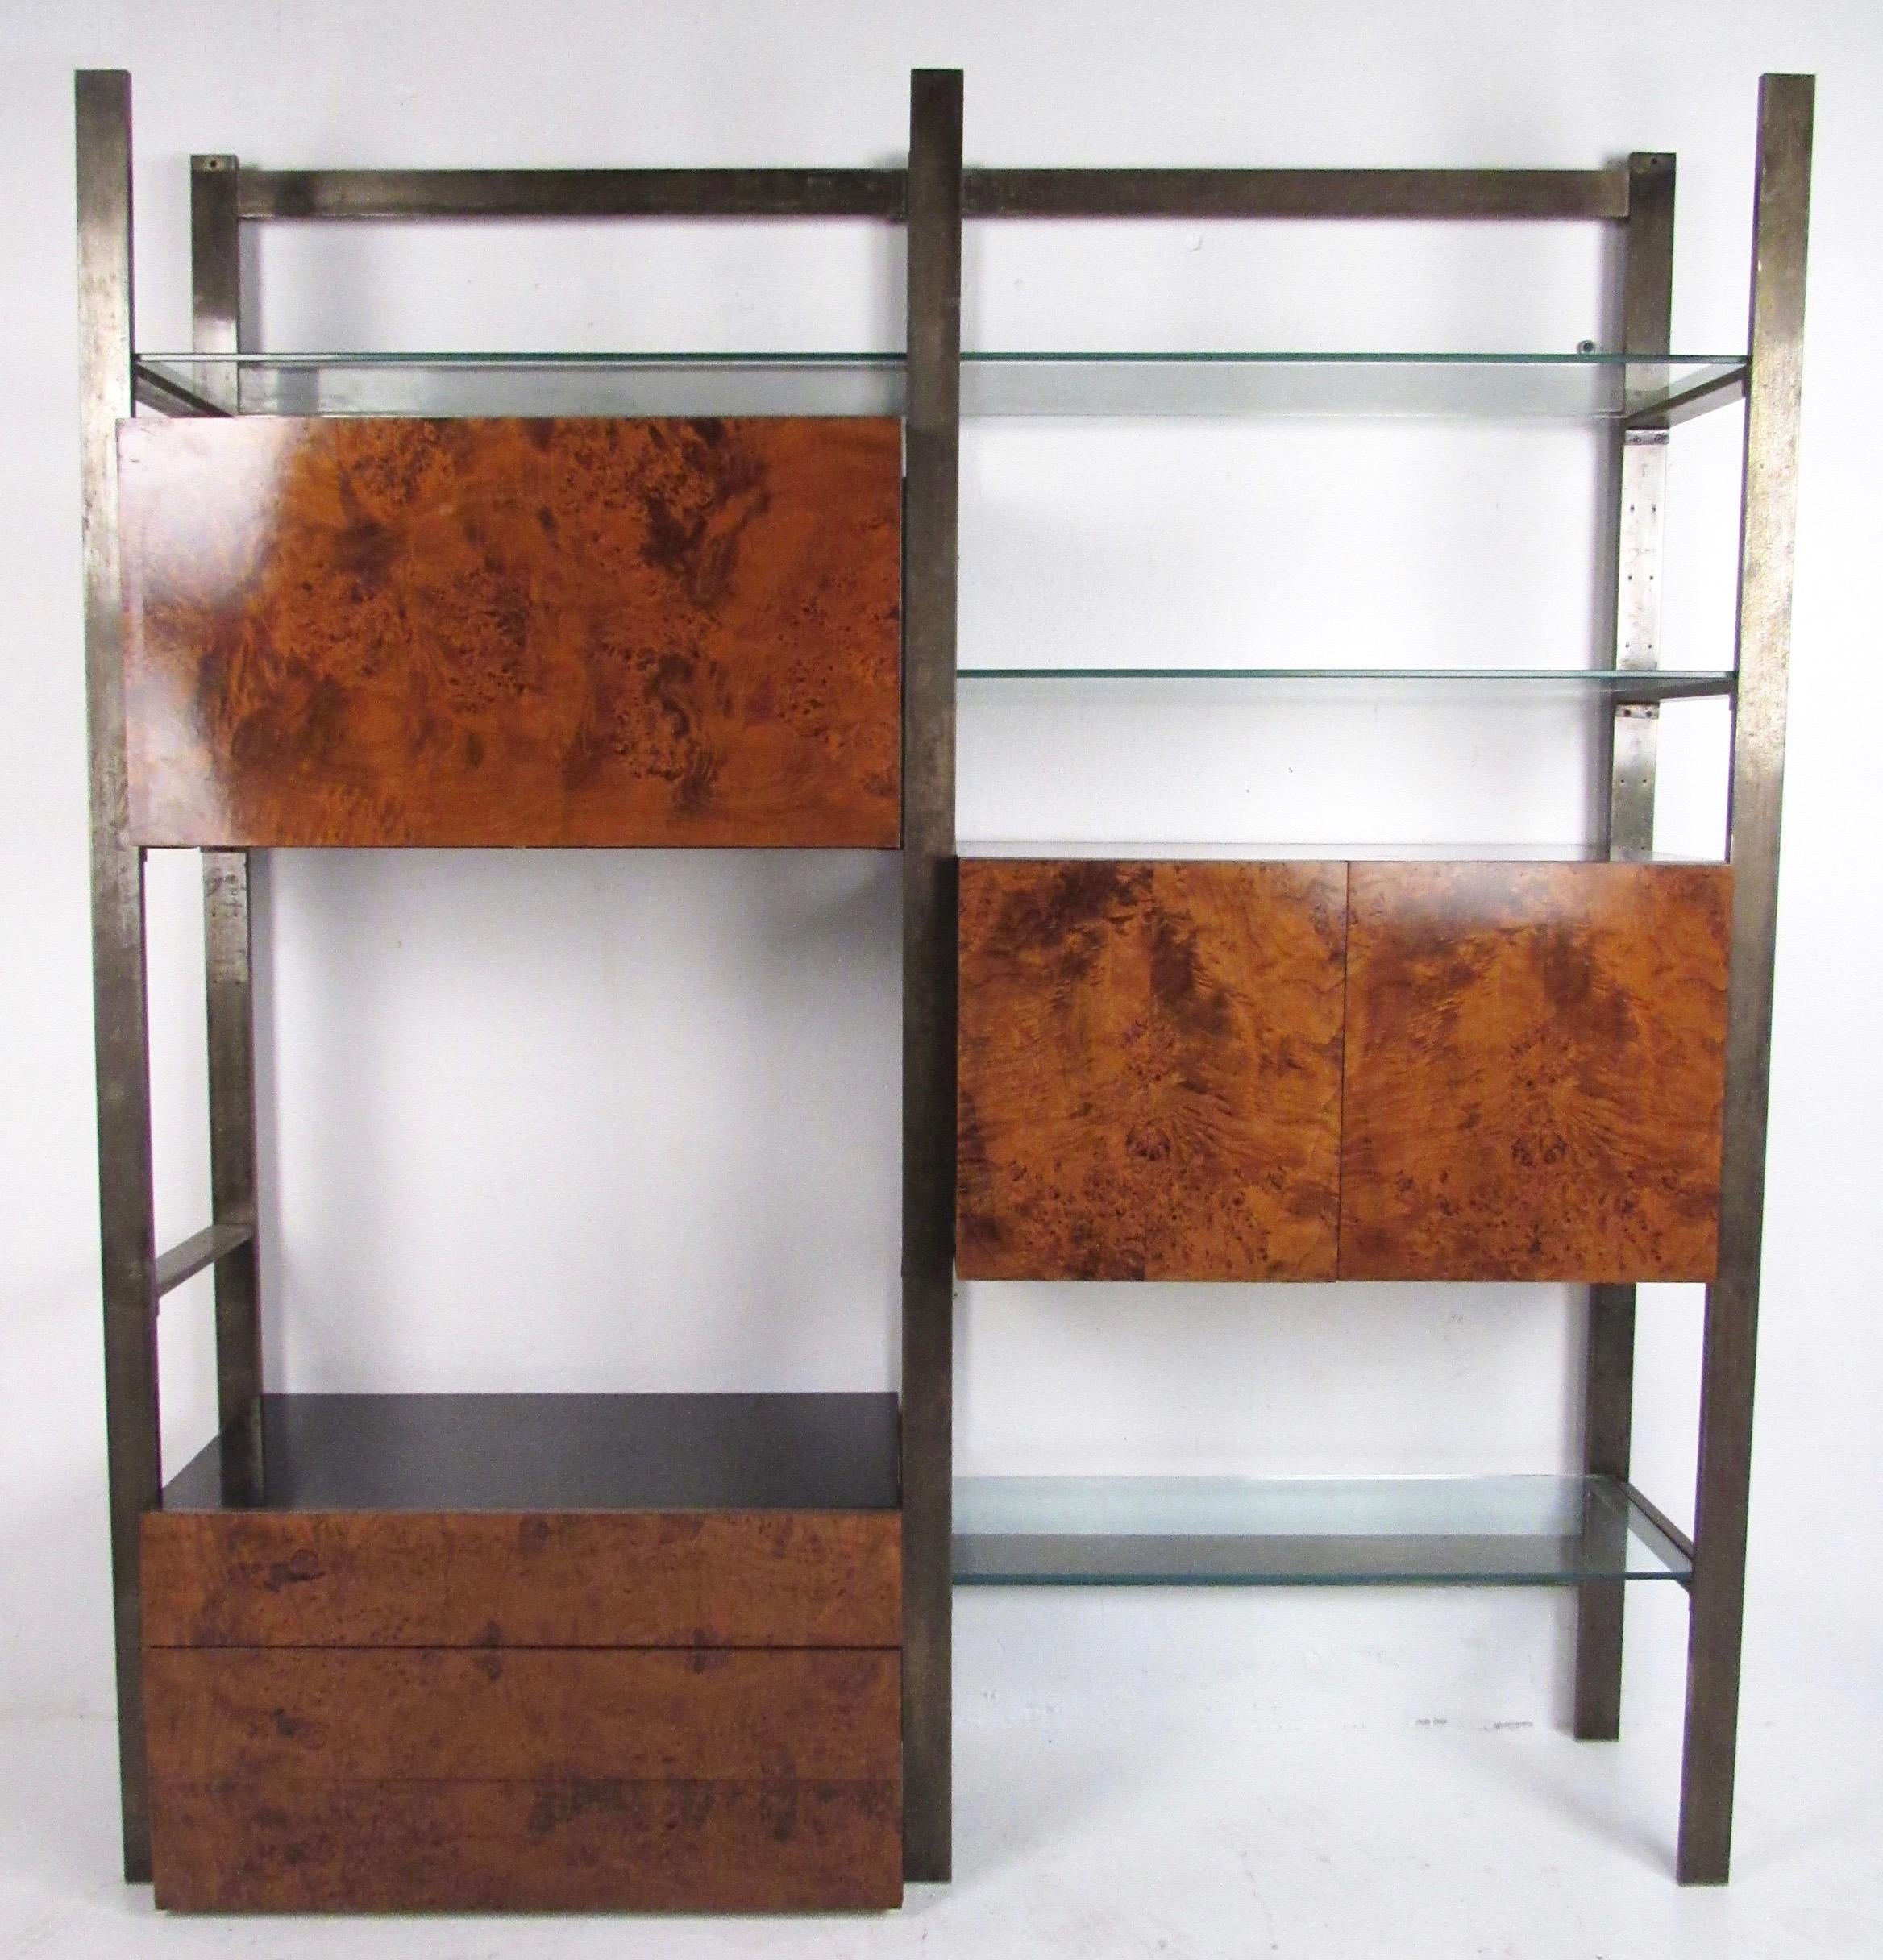 This striking Mid-Century Modern metal, glass, and burl wood wall unit makes an impressive vintage modern storage and display unit for home or showroom interior. Rich vintage burl wood cabinets along with sturdy patinated brass finish metal frame